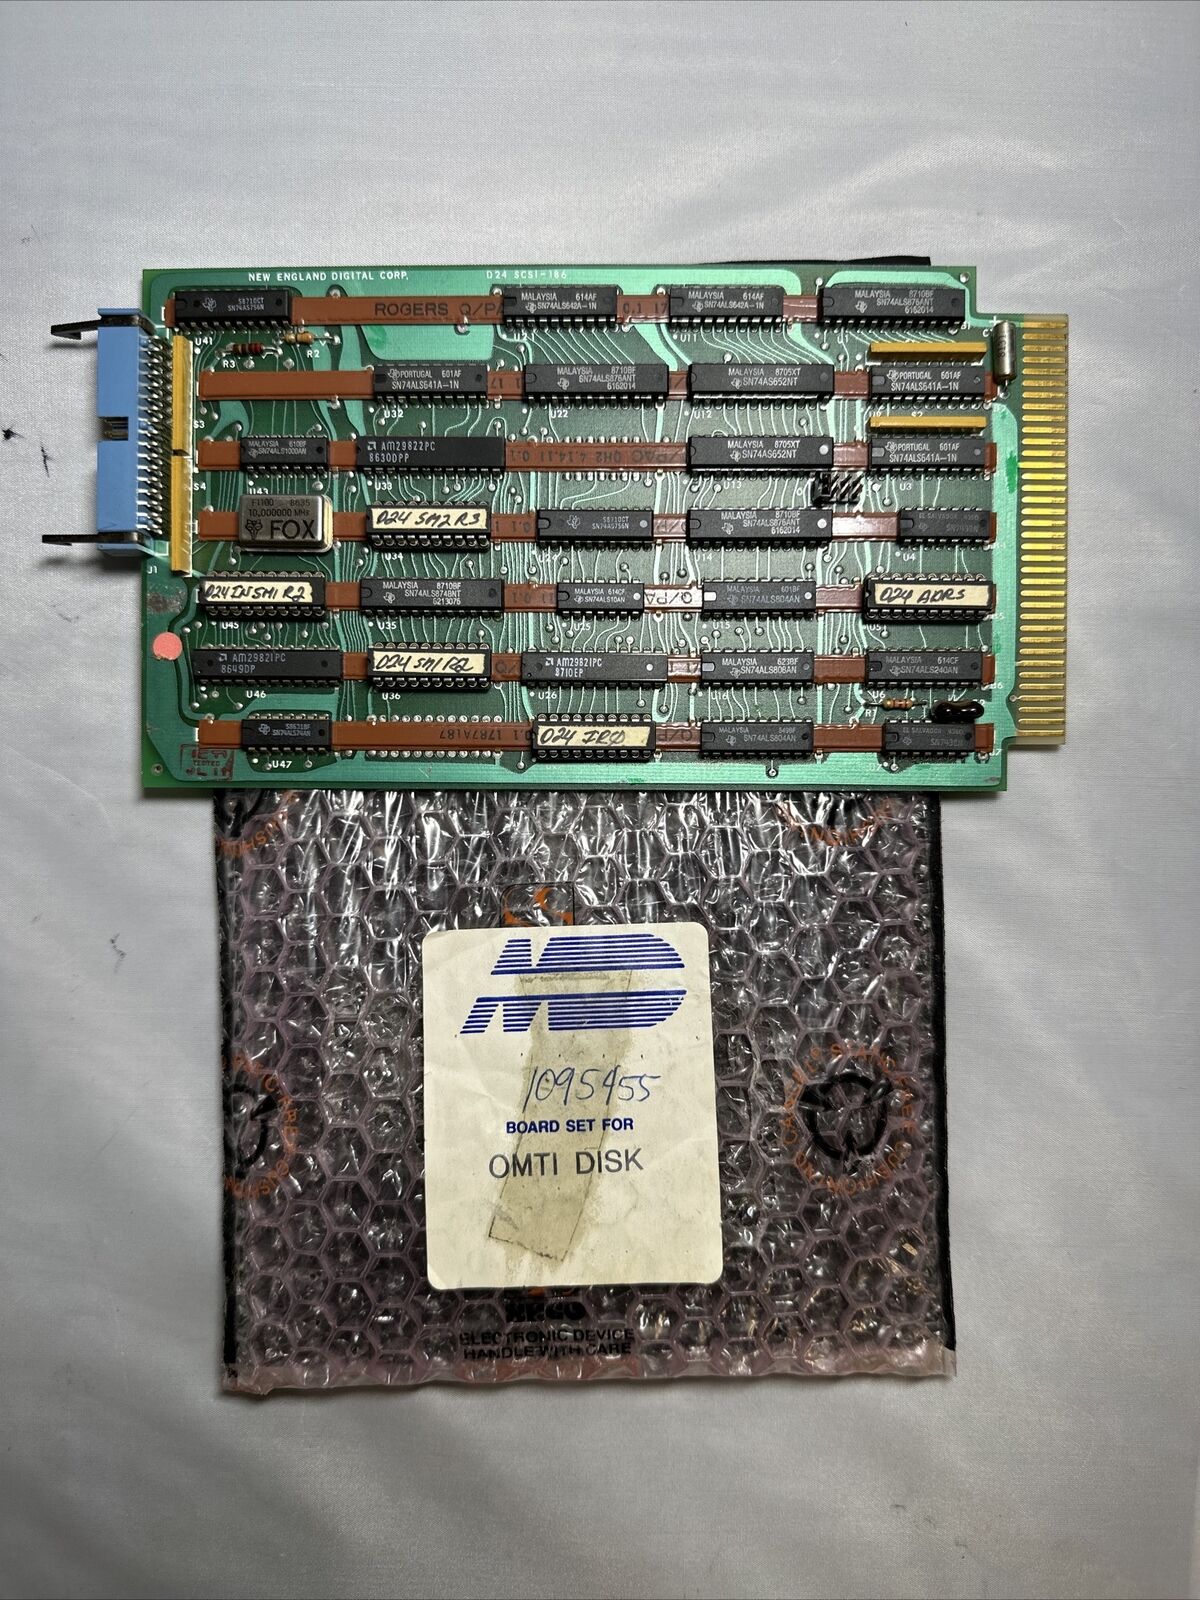 computer board NEW ENGLANDCORP D24 SCSI-186 spare parts